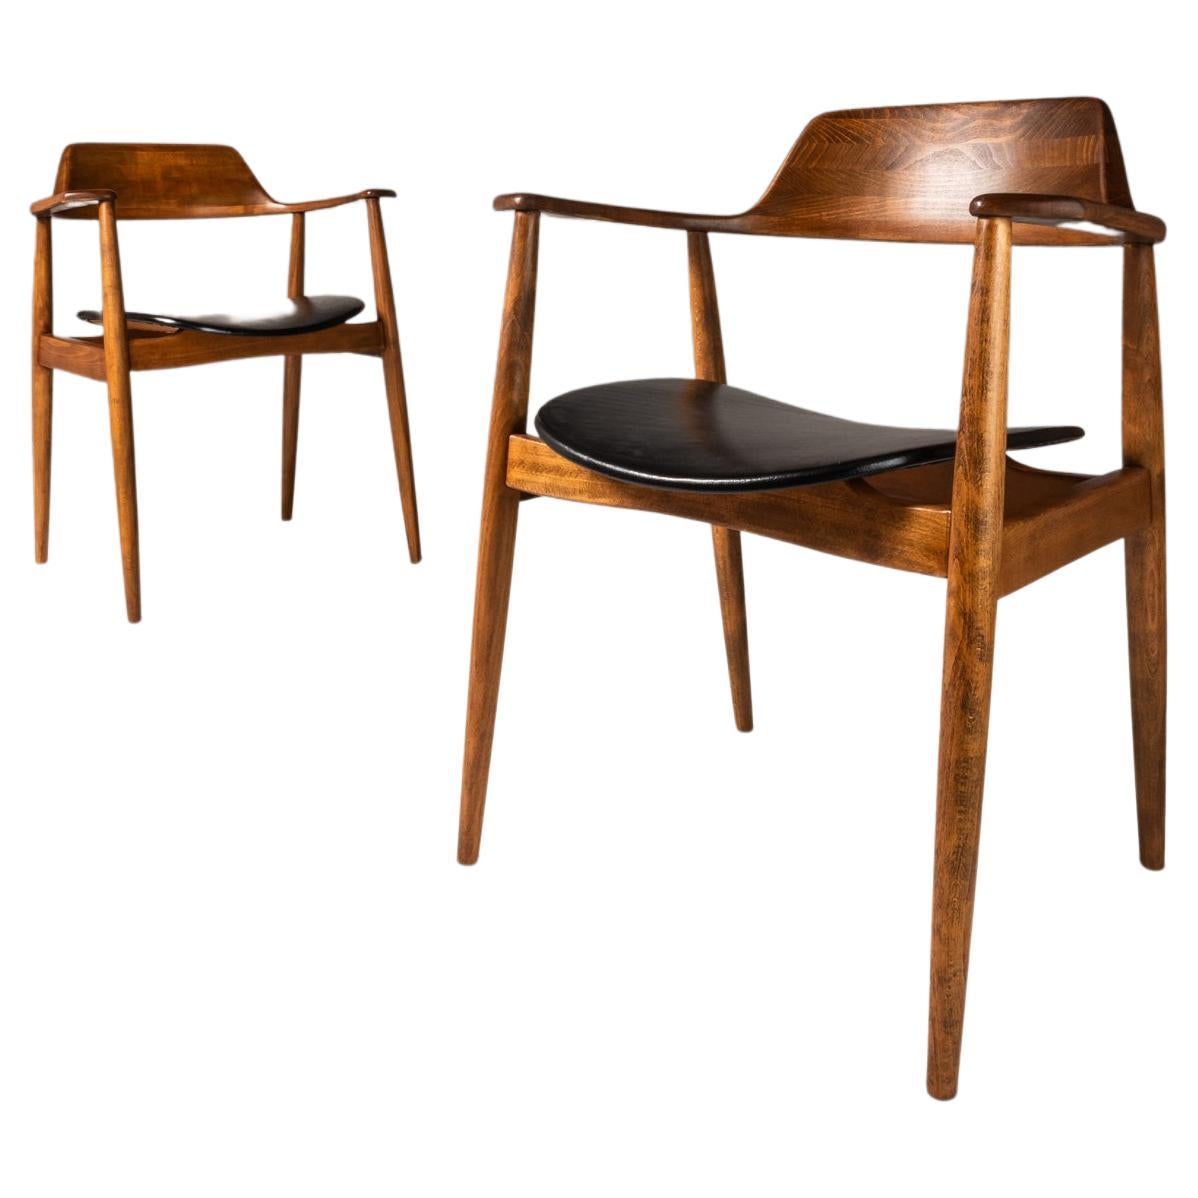 Set of 2 Model 411 Armchairs in Beech by Hartmut Lohmeyer for Wilkahn, c. 1950s For Sale